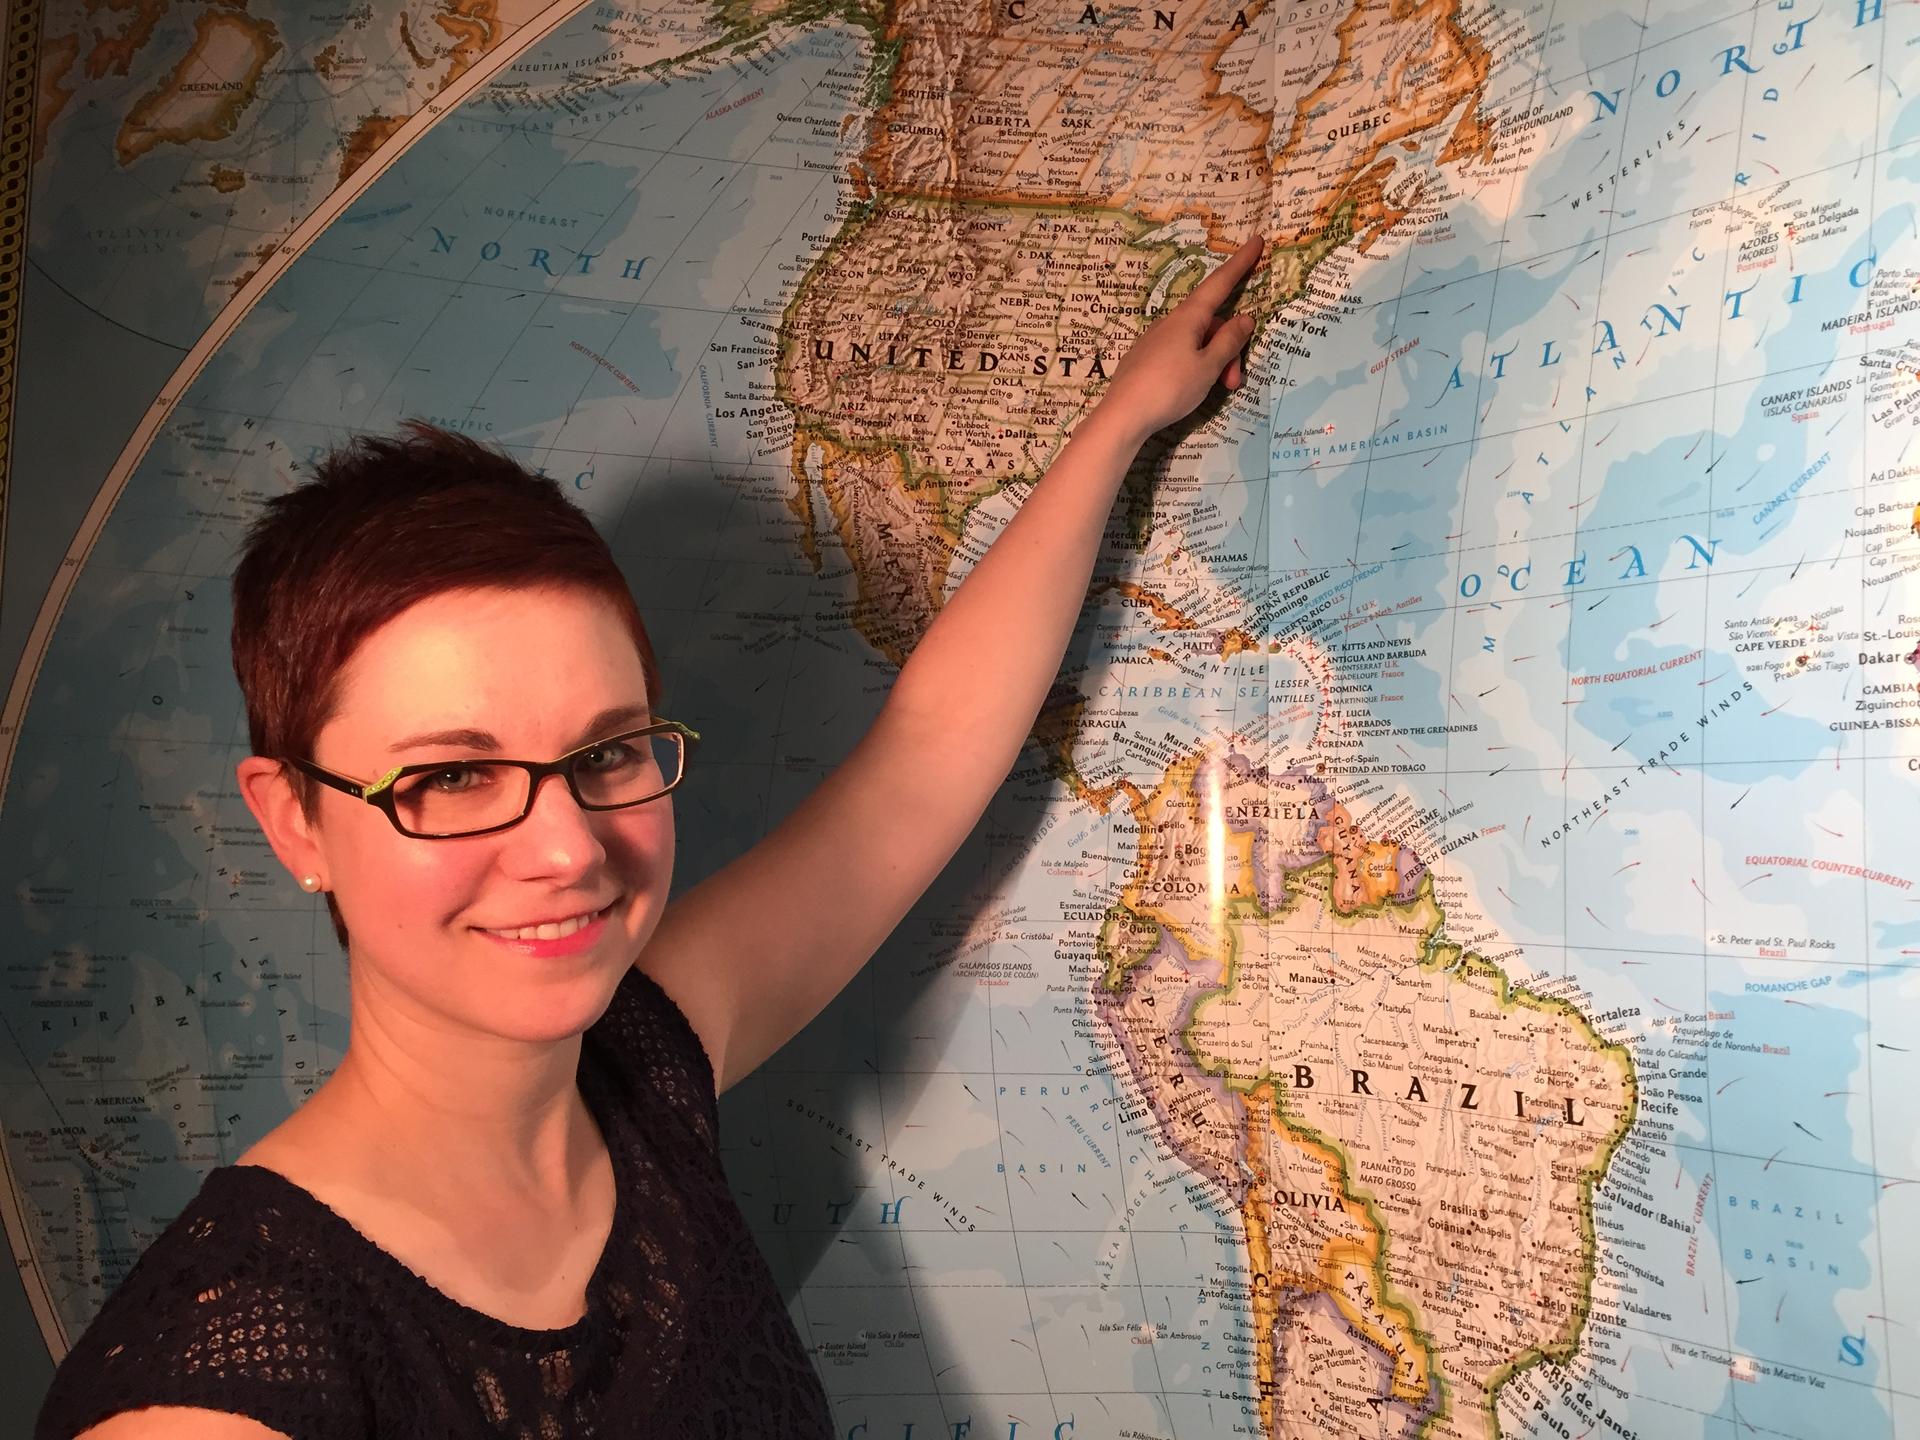 April Verch pointing to Ottawa Valley on a world map in the Nan and Bill Harris studios at WGBH